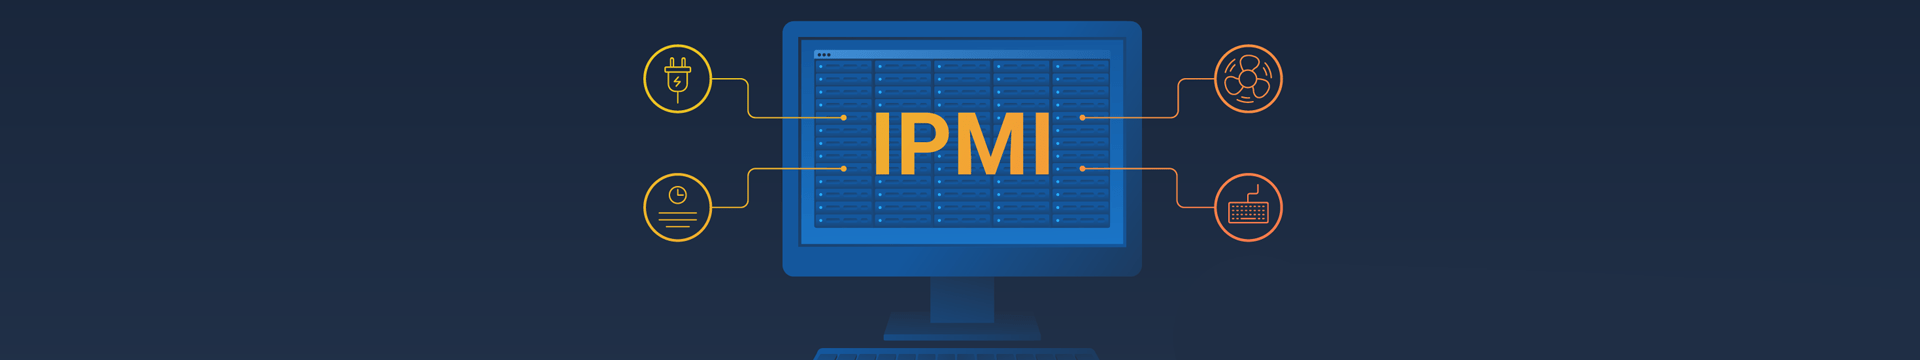 What is IPMI